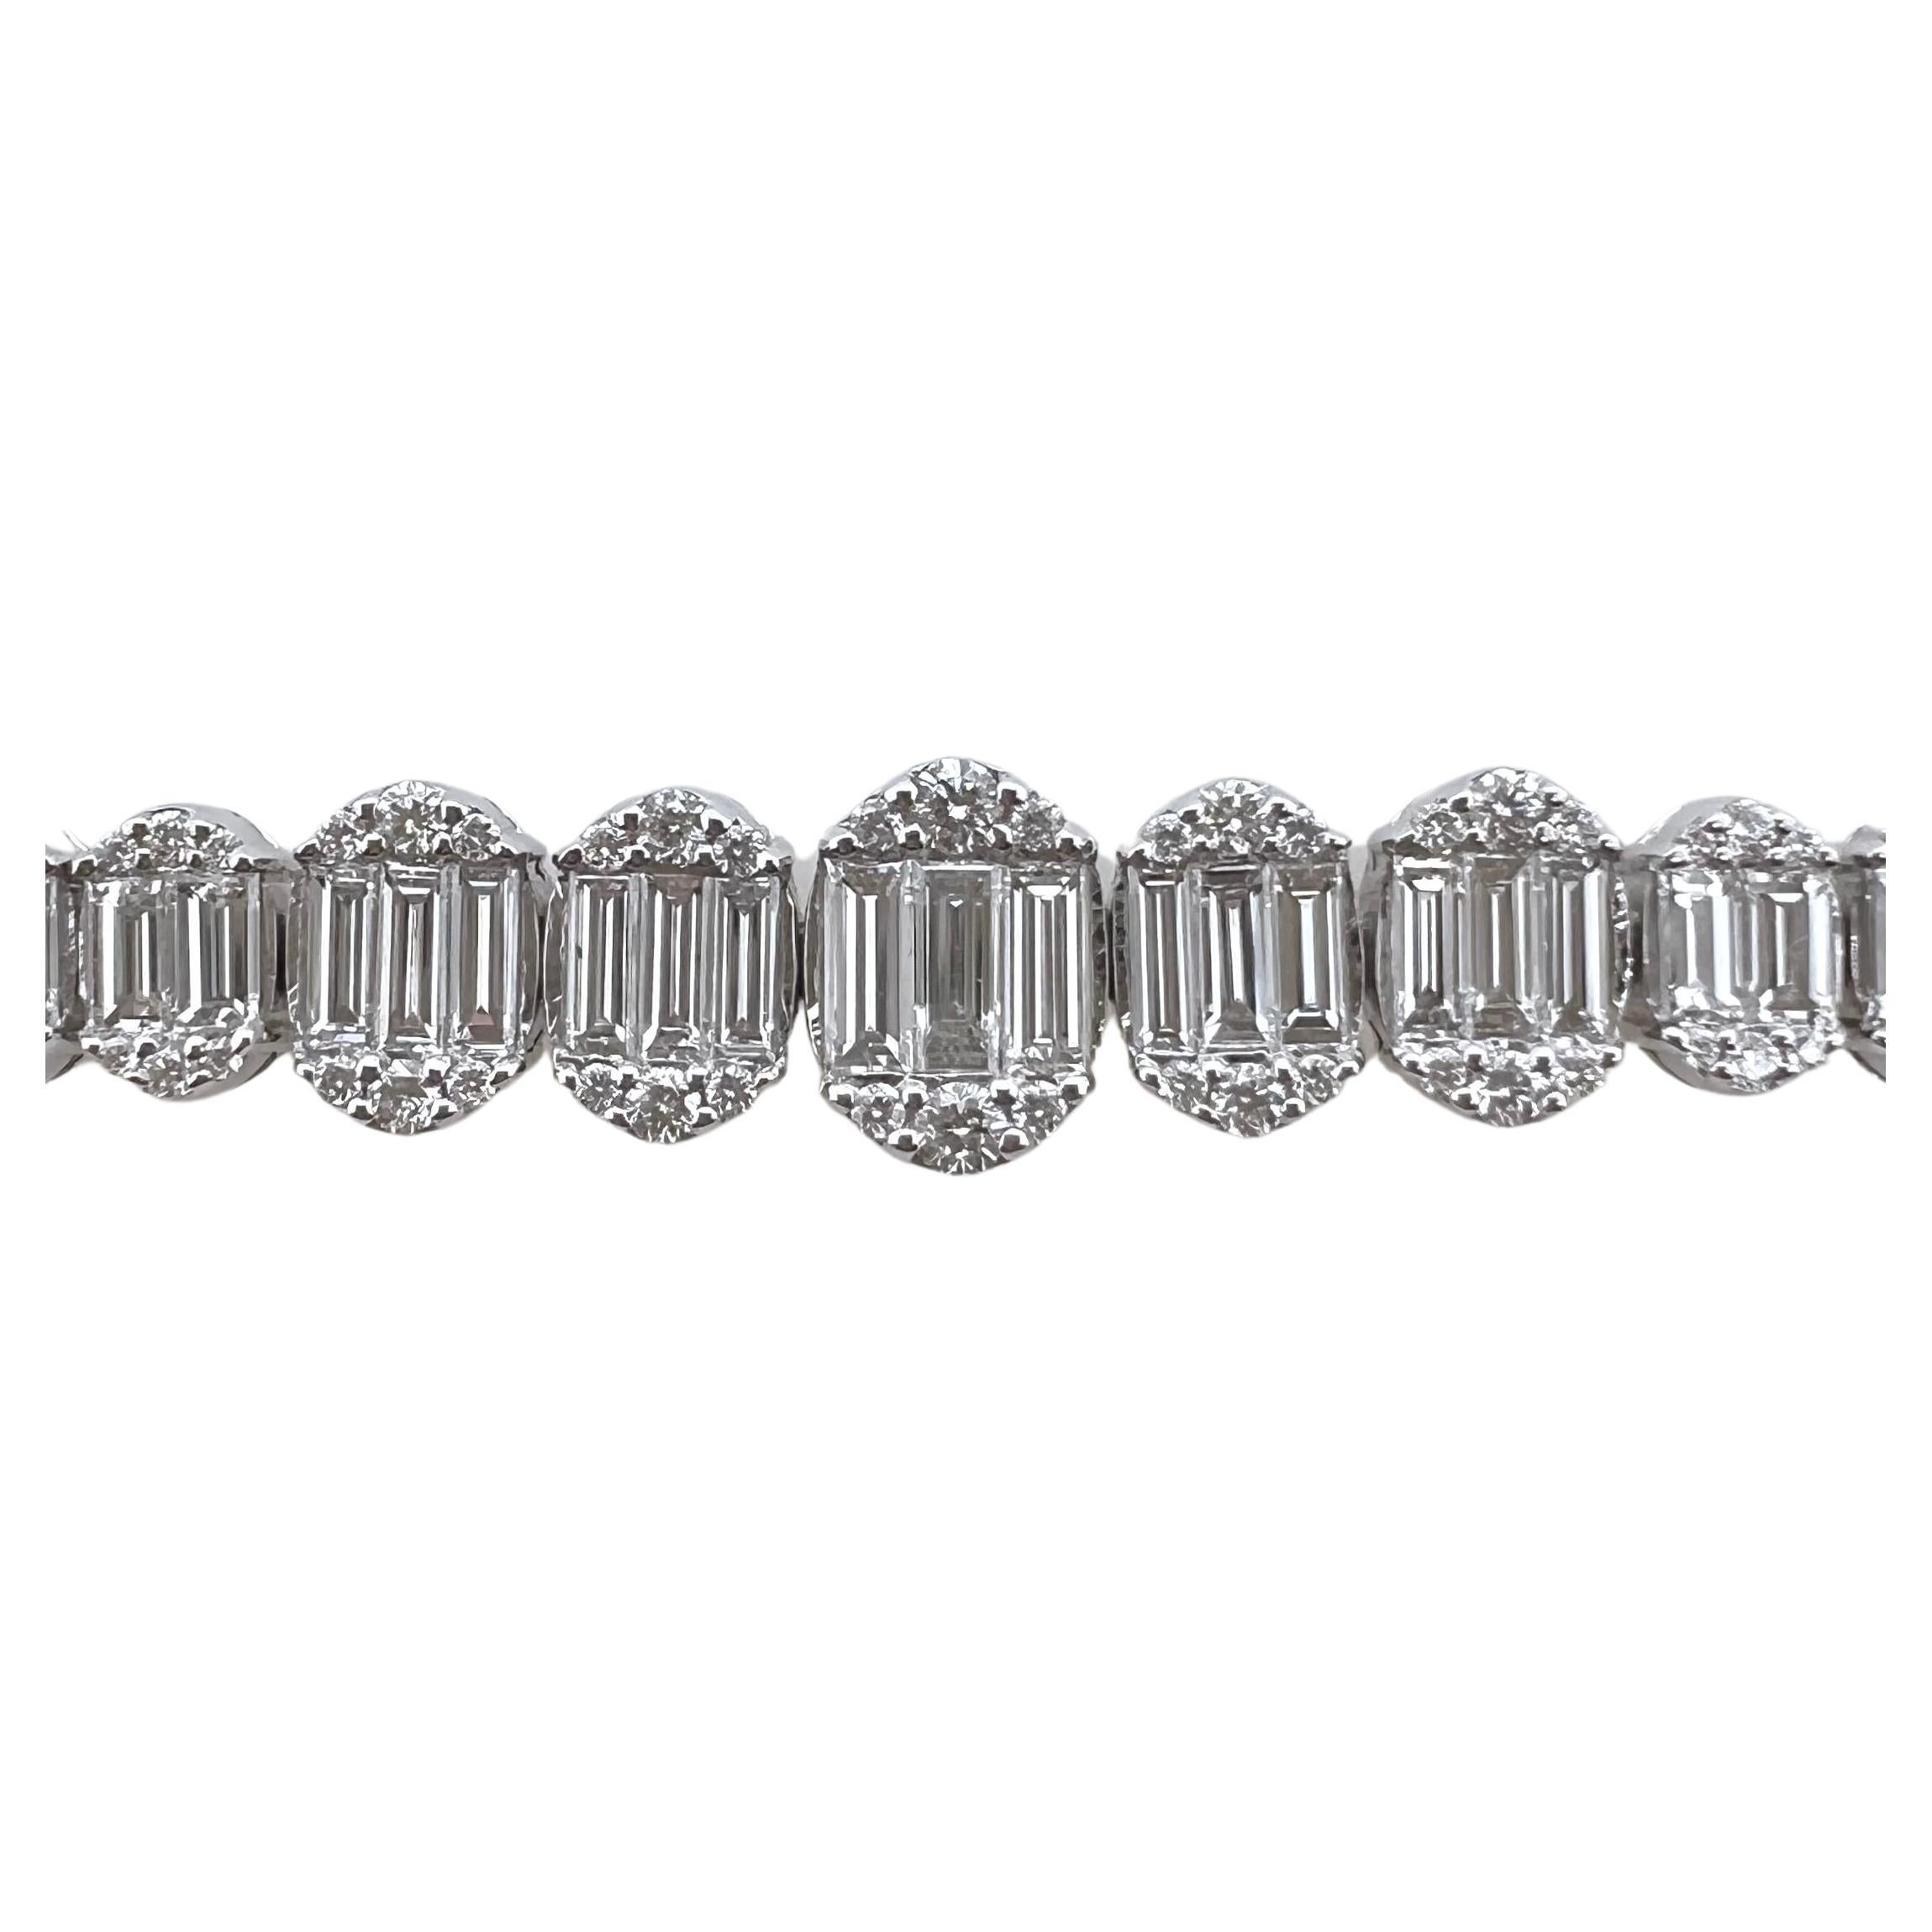 This diamond tennis bracelet is unique and an eye catcher! The baguettes are graduated in the design with the round brilliant diamonds on the outside shoulders. The contrast of the brilliant round diamonds against the crisp, white baguettes is